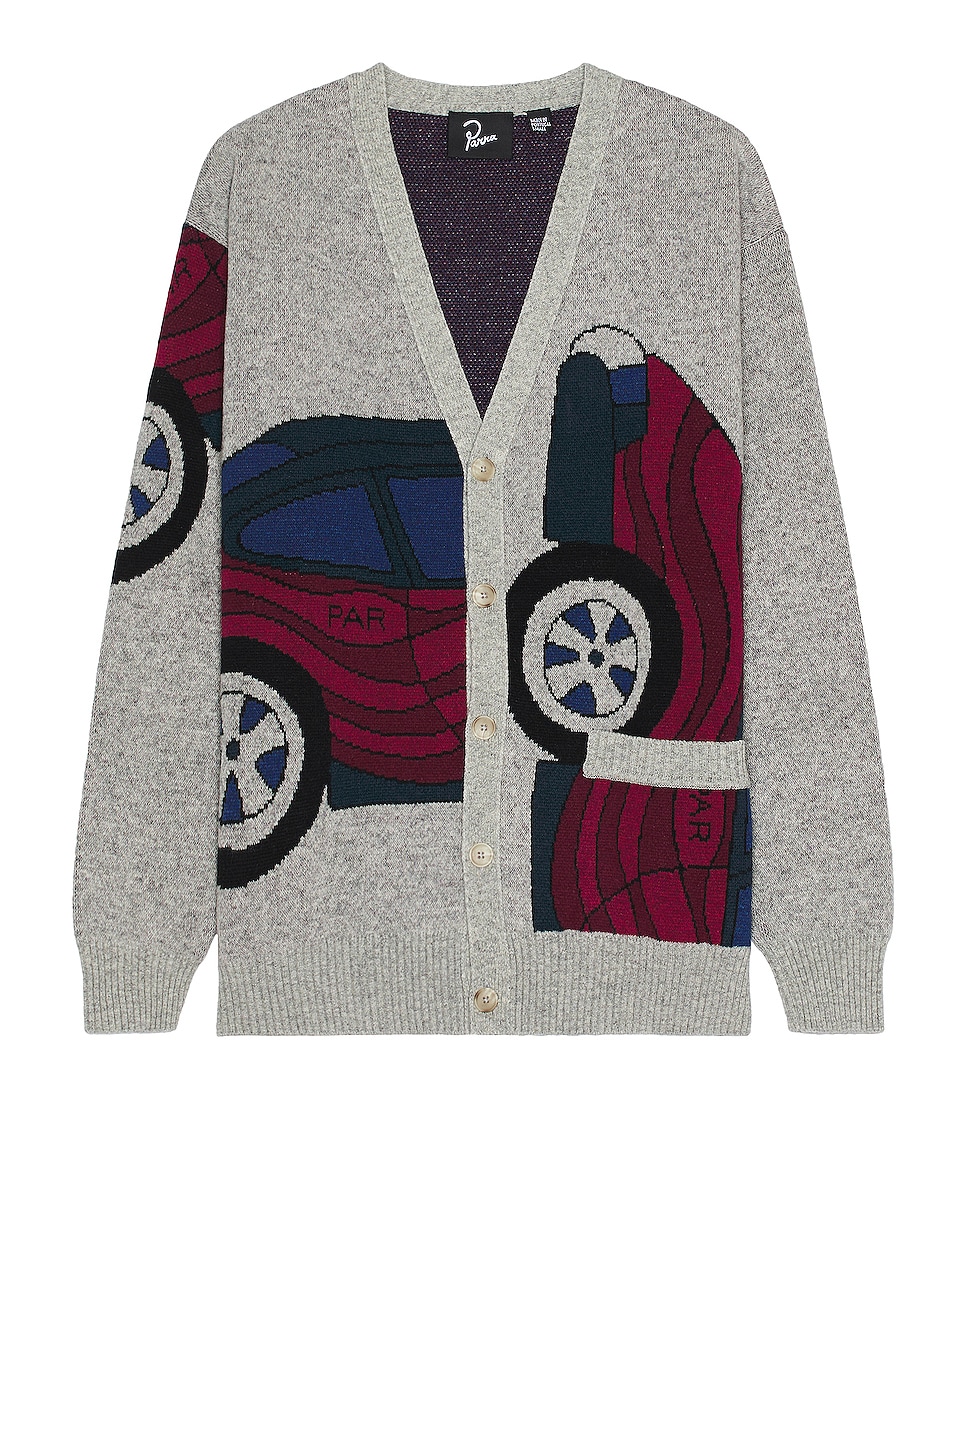 Image 1 of By Parra No Parking Knitted Cardigan in Grey Melange